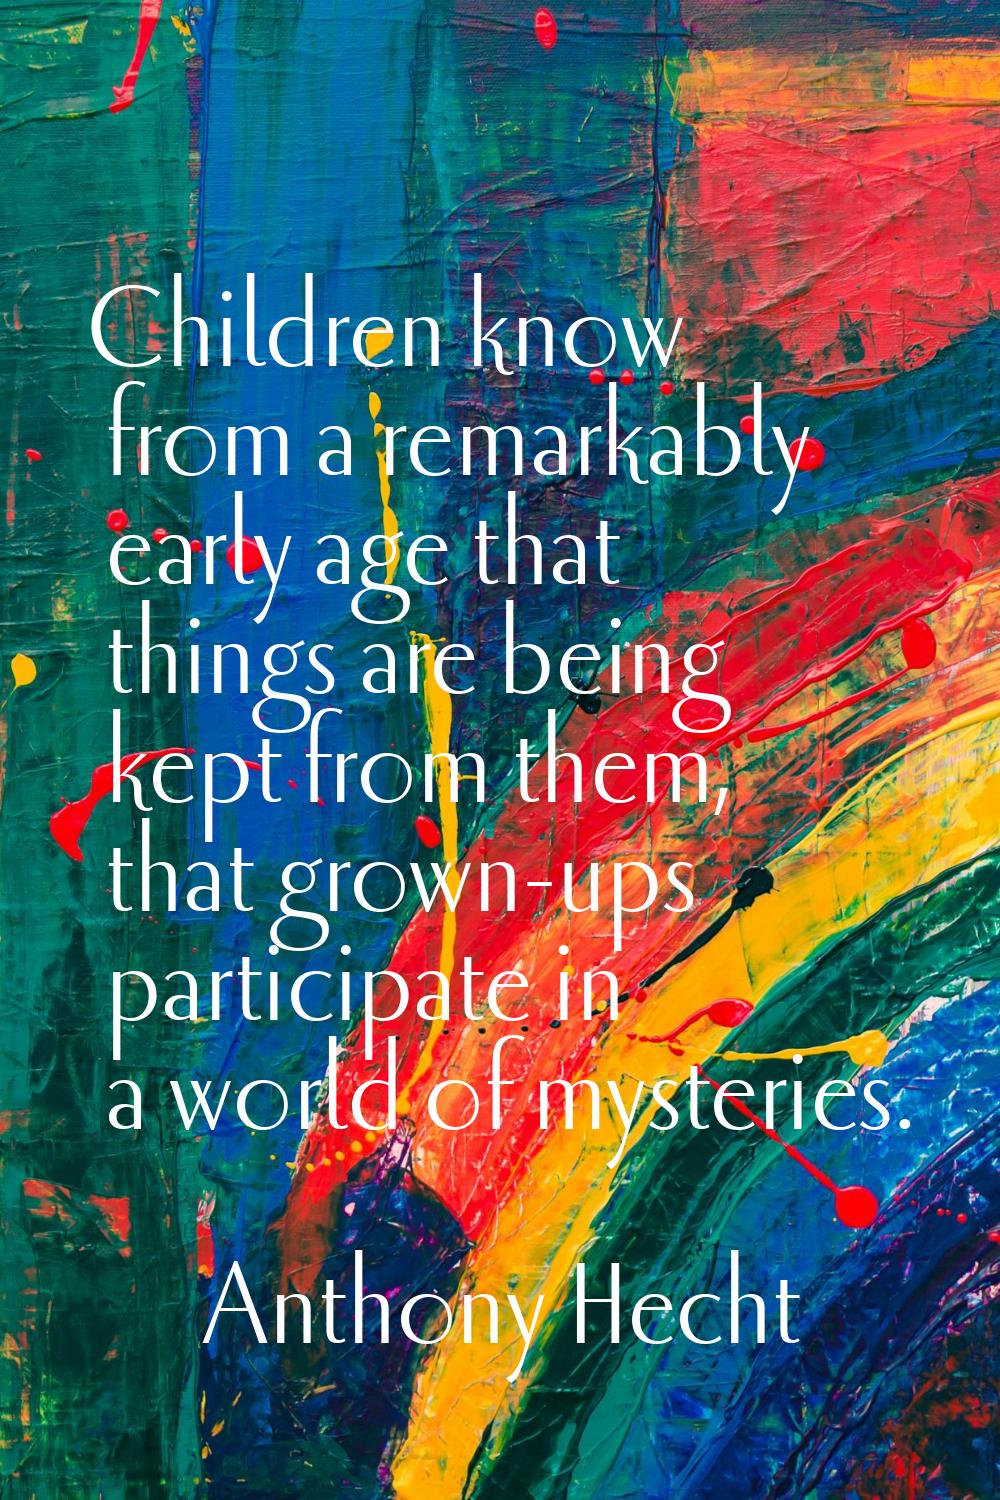 Children know from a remarkably early age that things are being kept from them, that grown-ups part